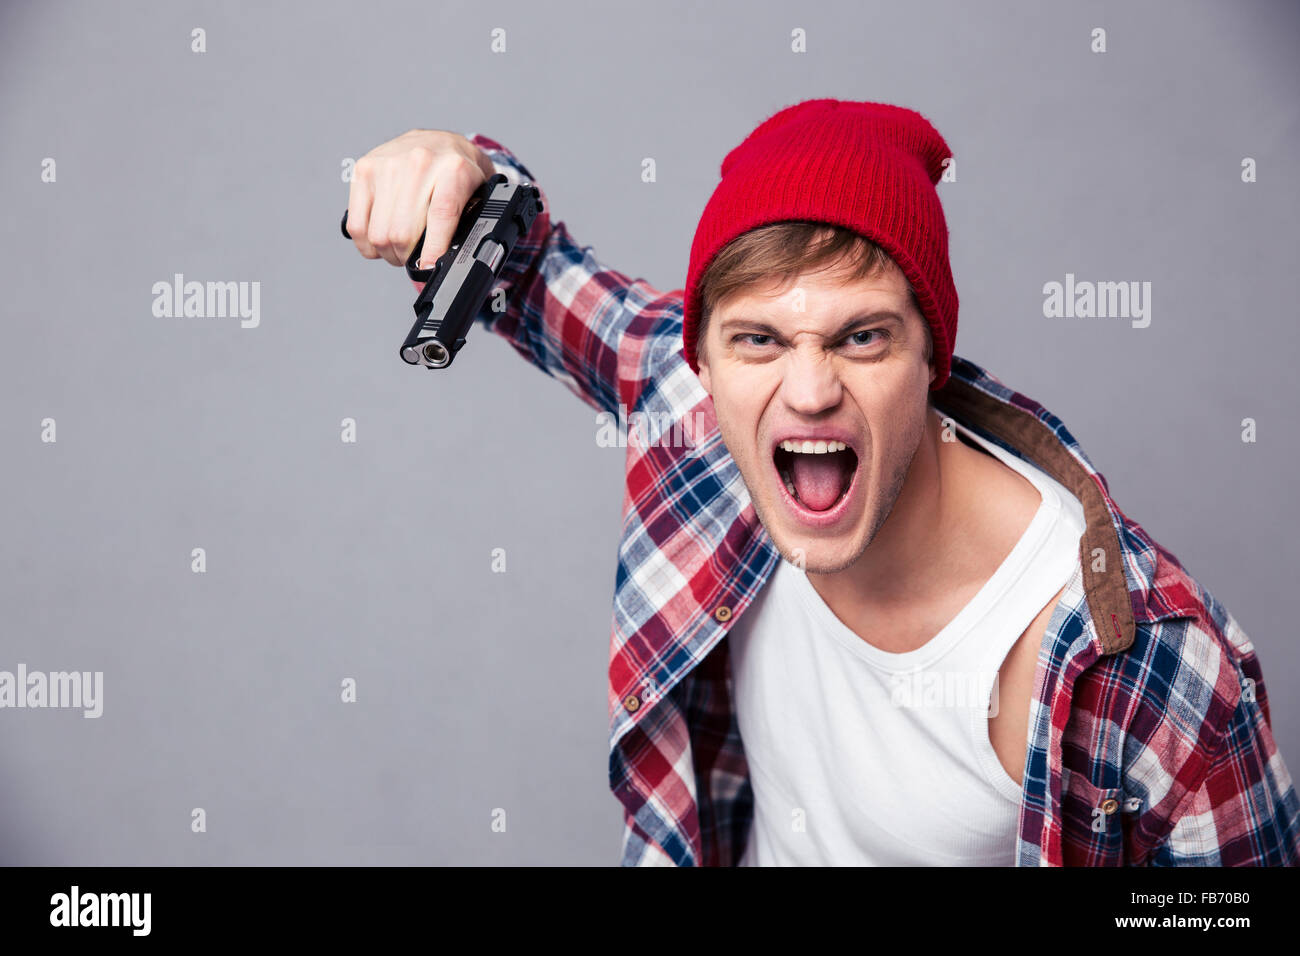 Dangerous agressive young man in checkered shirt and red hat shouting and threatening with gun over grey background Stock Photo